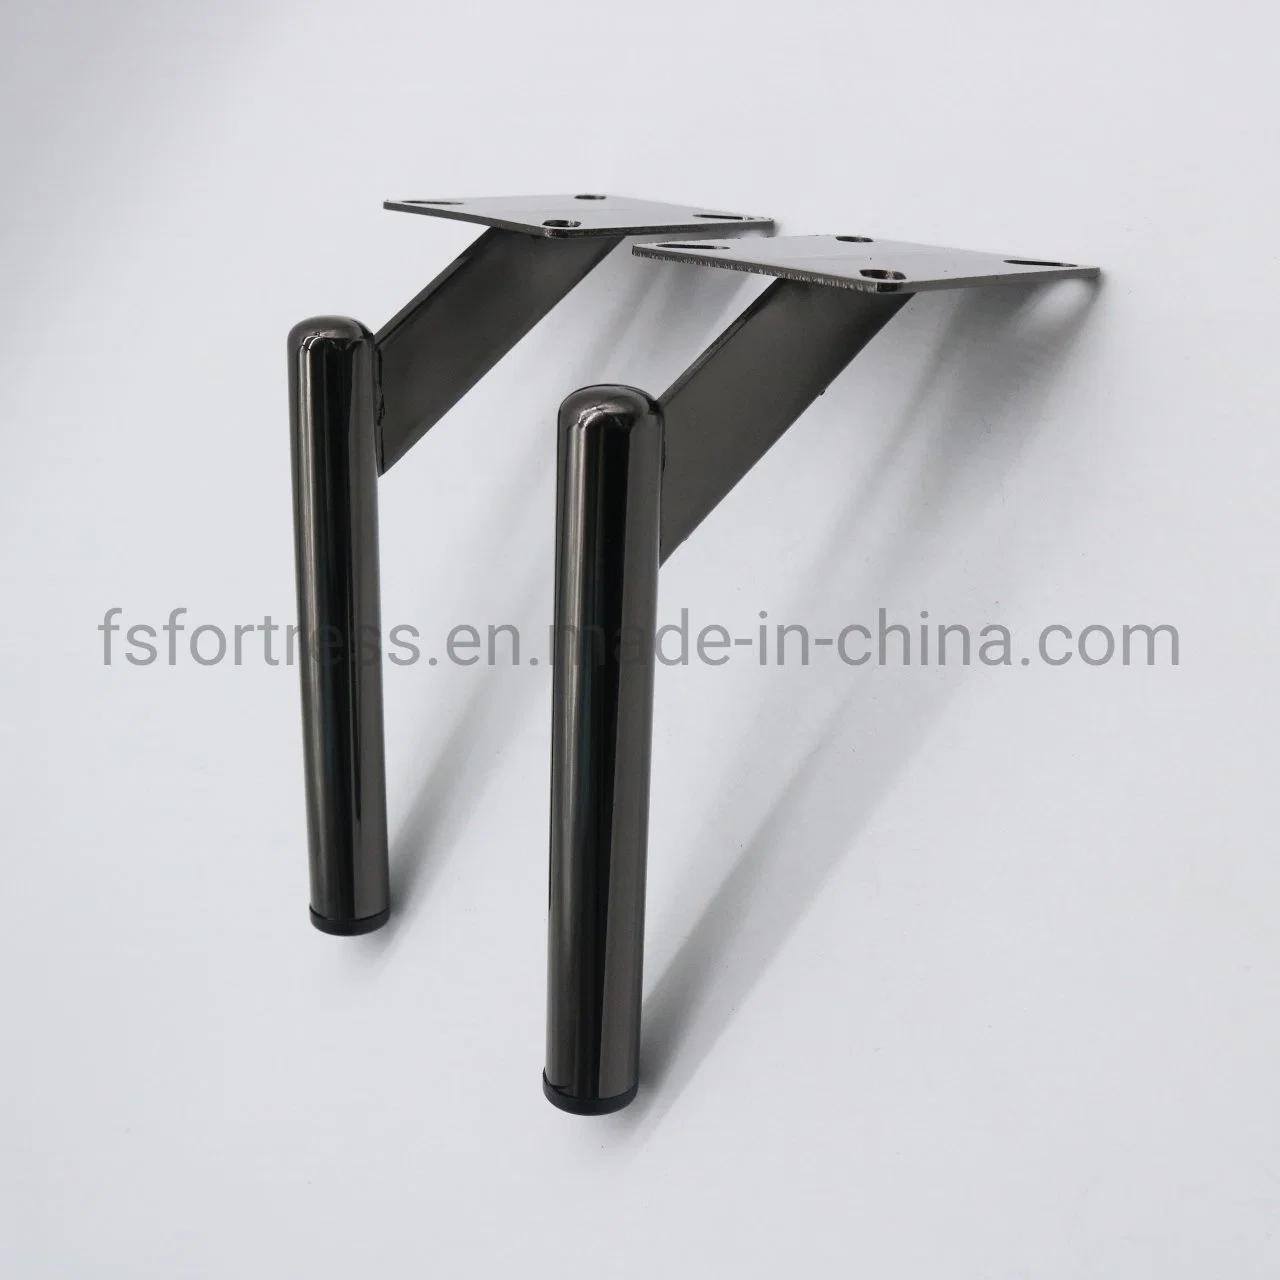 Furniture Legs Accessories Industrial Table Legs Metallic Base for Round Table